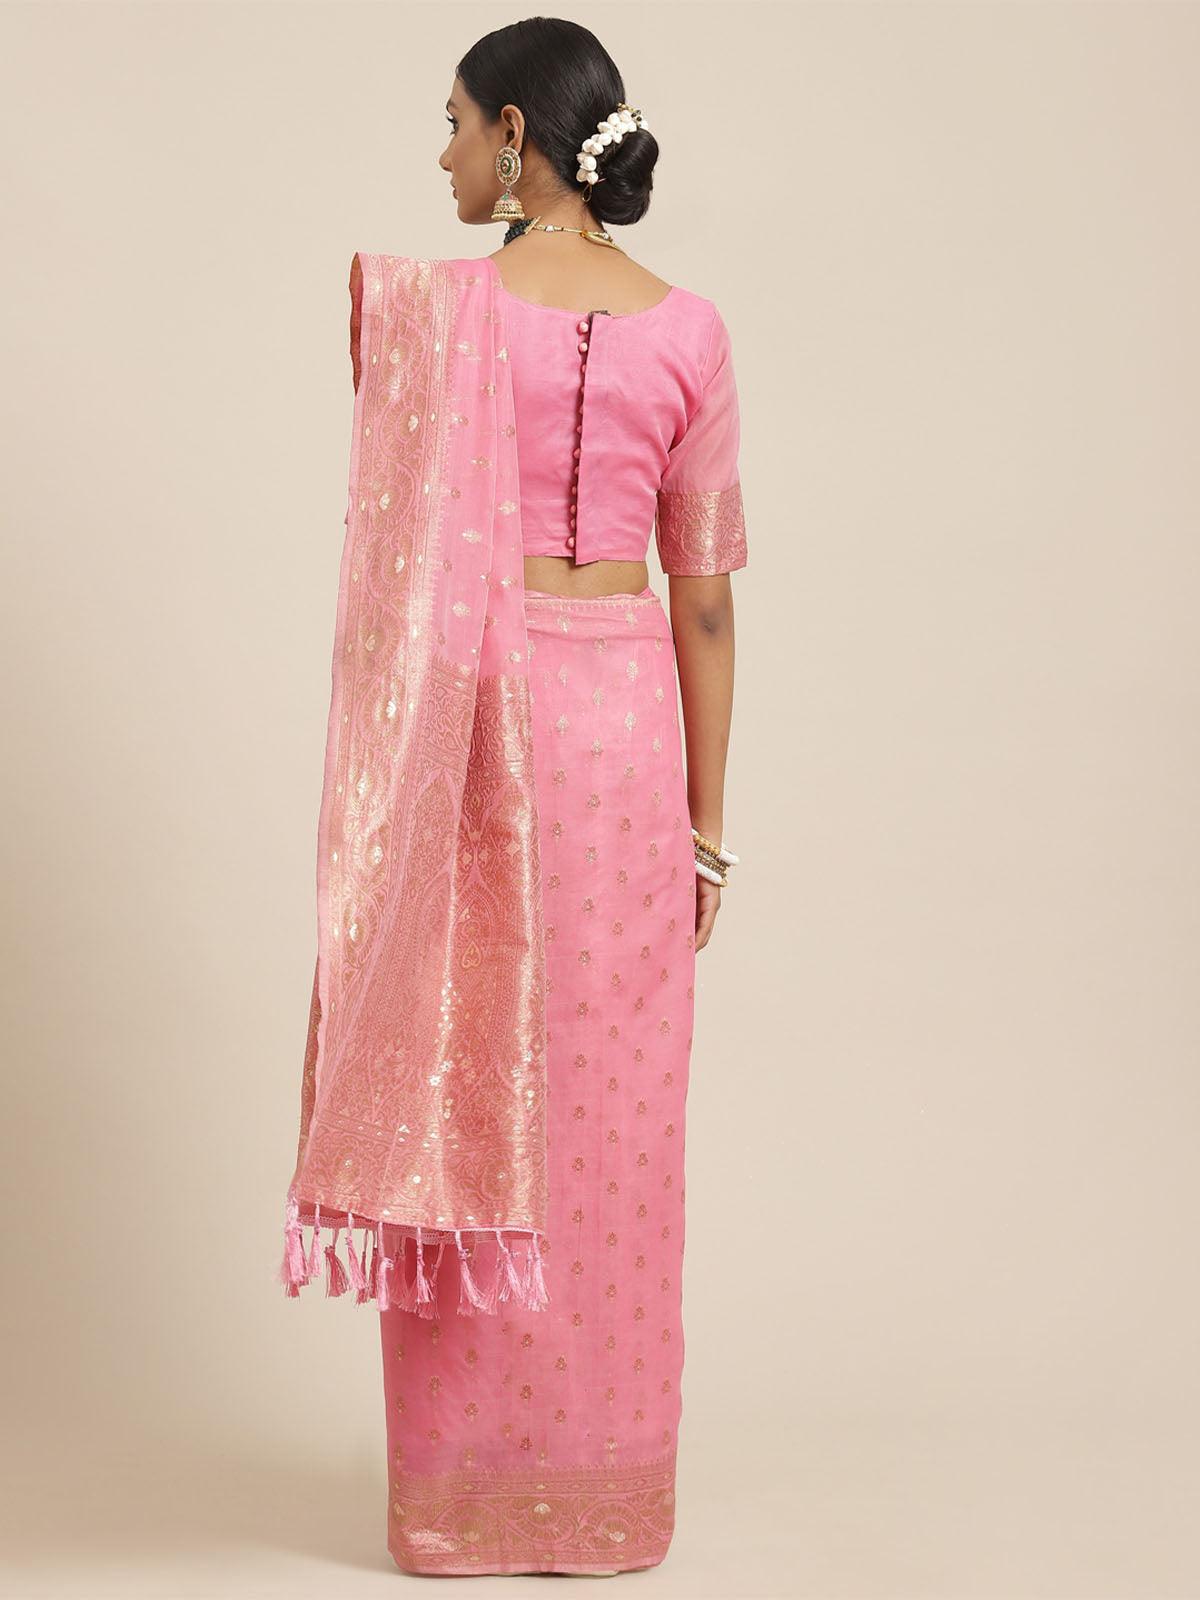 Women's Silk Cotton Pink Woven Design Woven saree With Blouse Piece - Odette